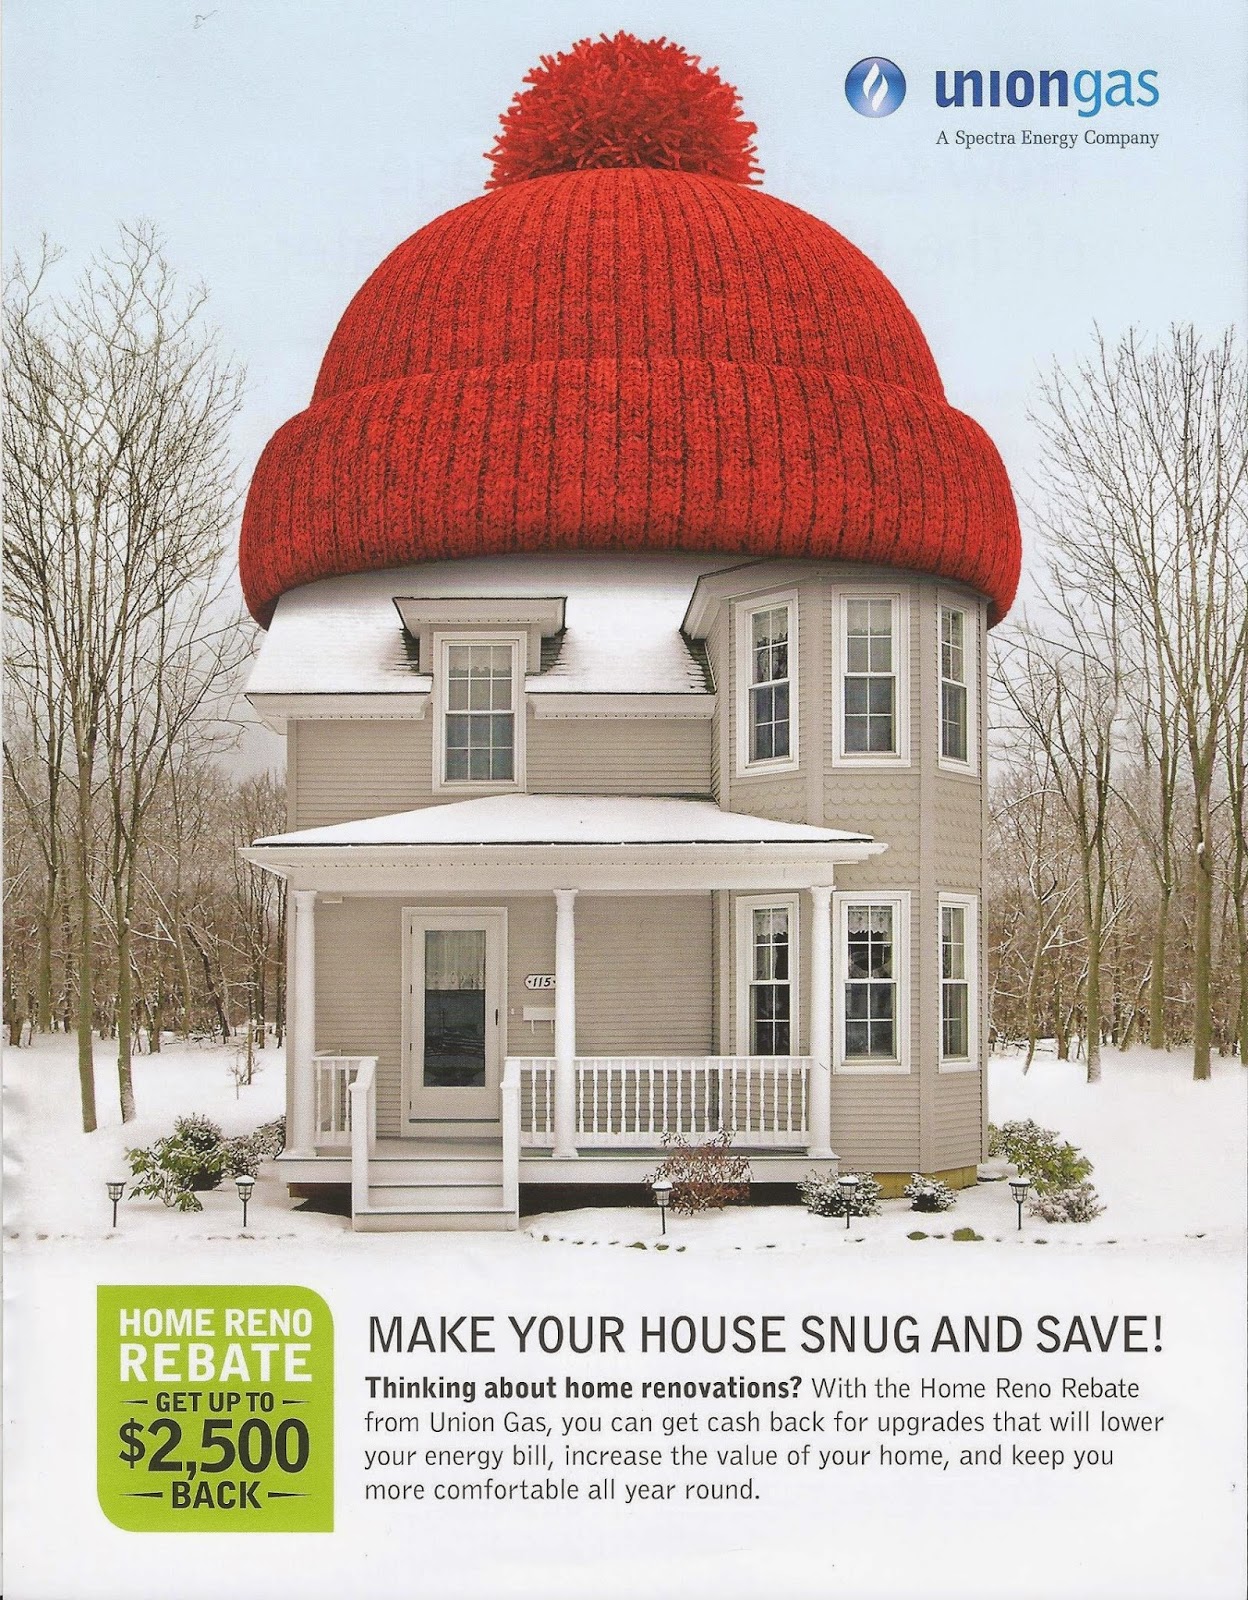 Hst Rebate For Home Renovations